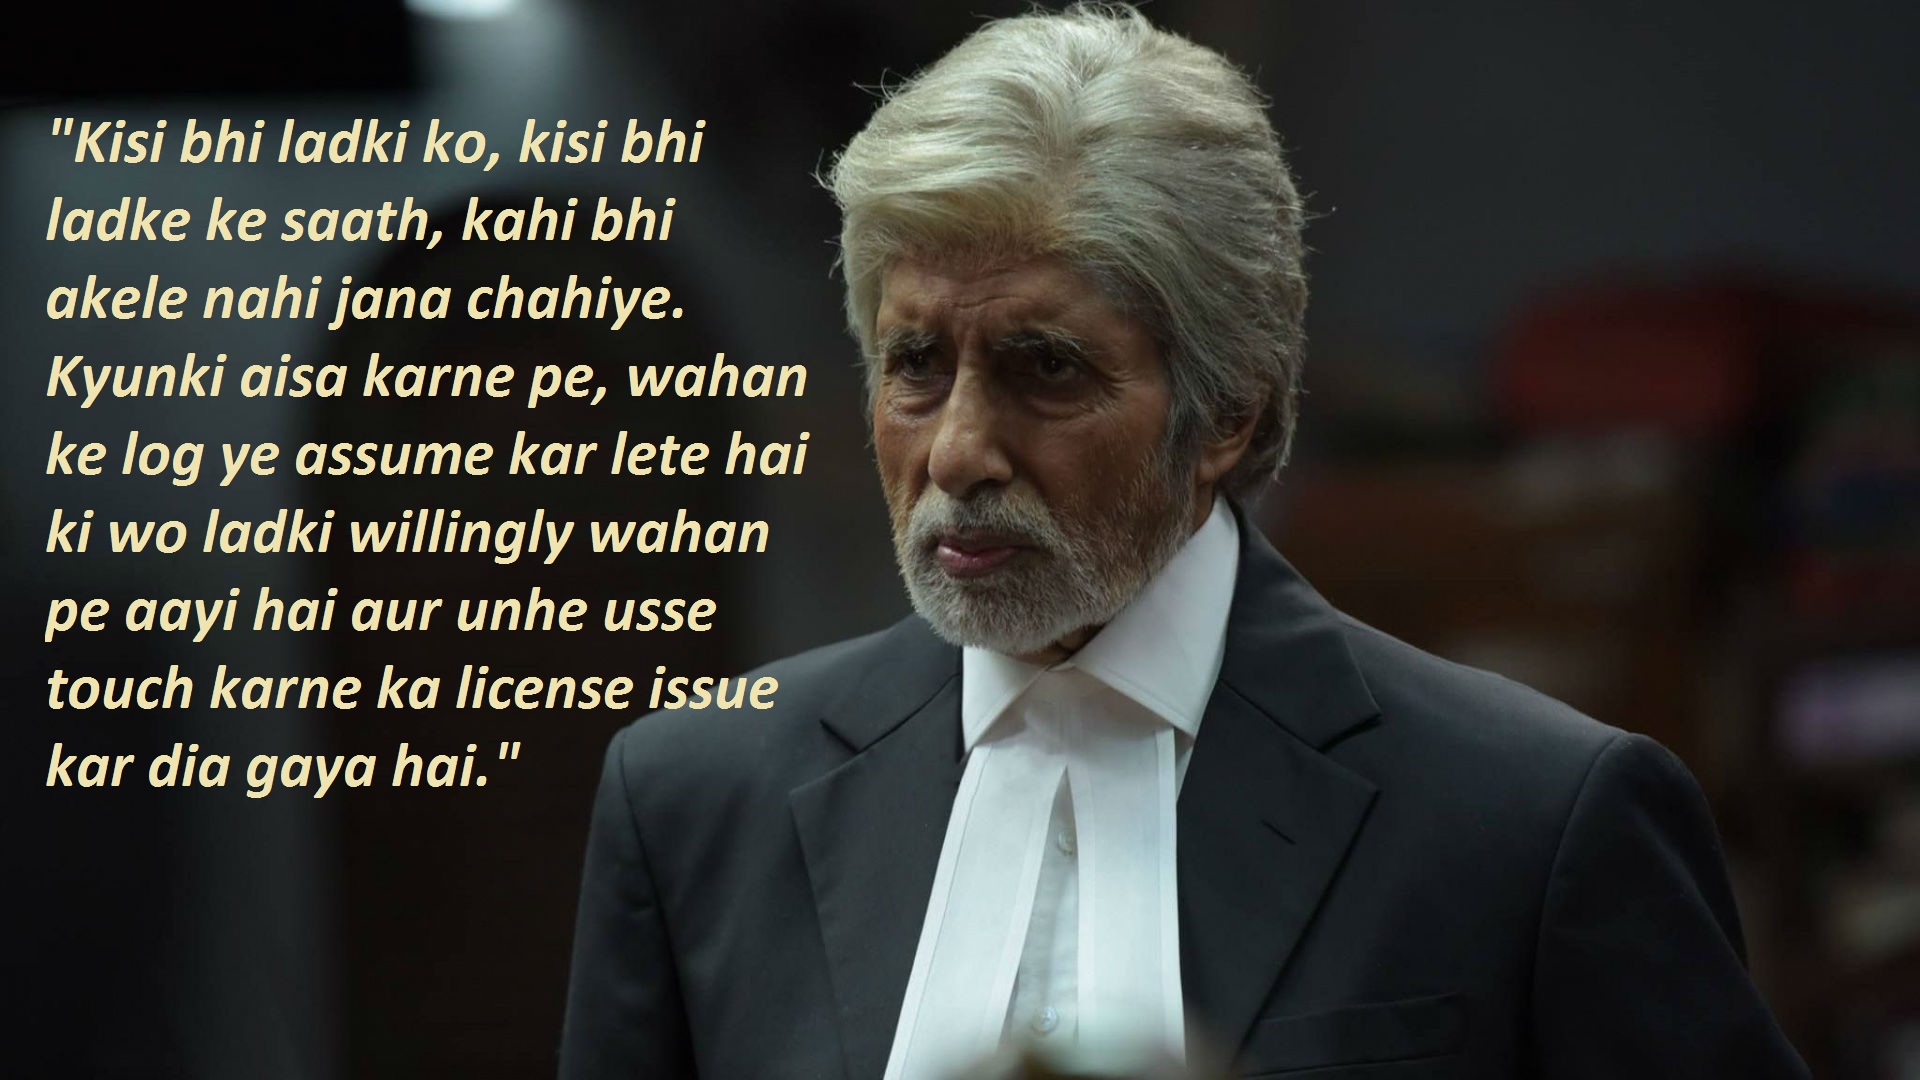 2. Best Dialogues From PINK Movie